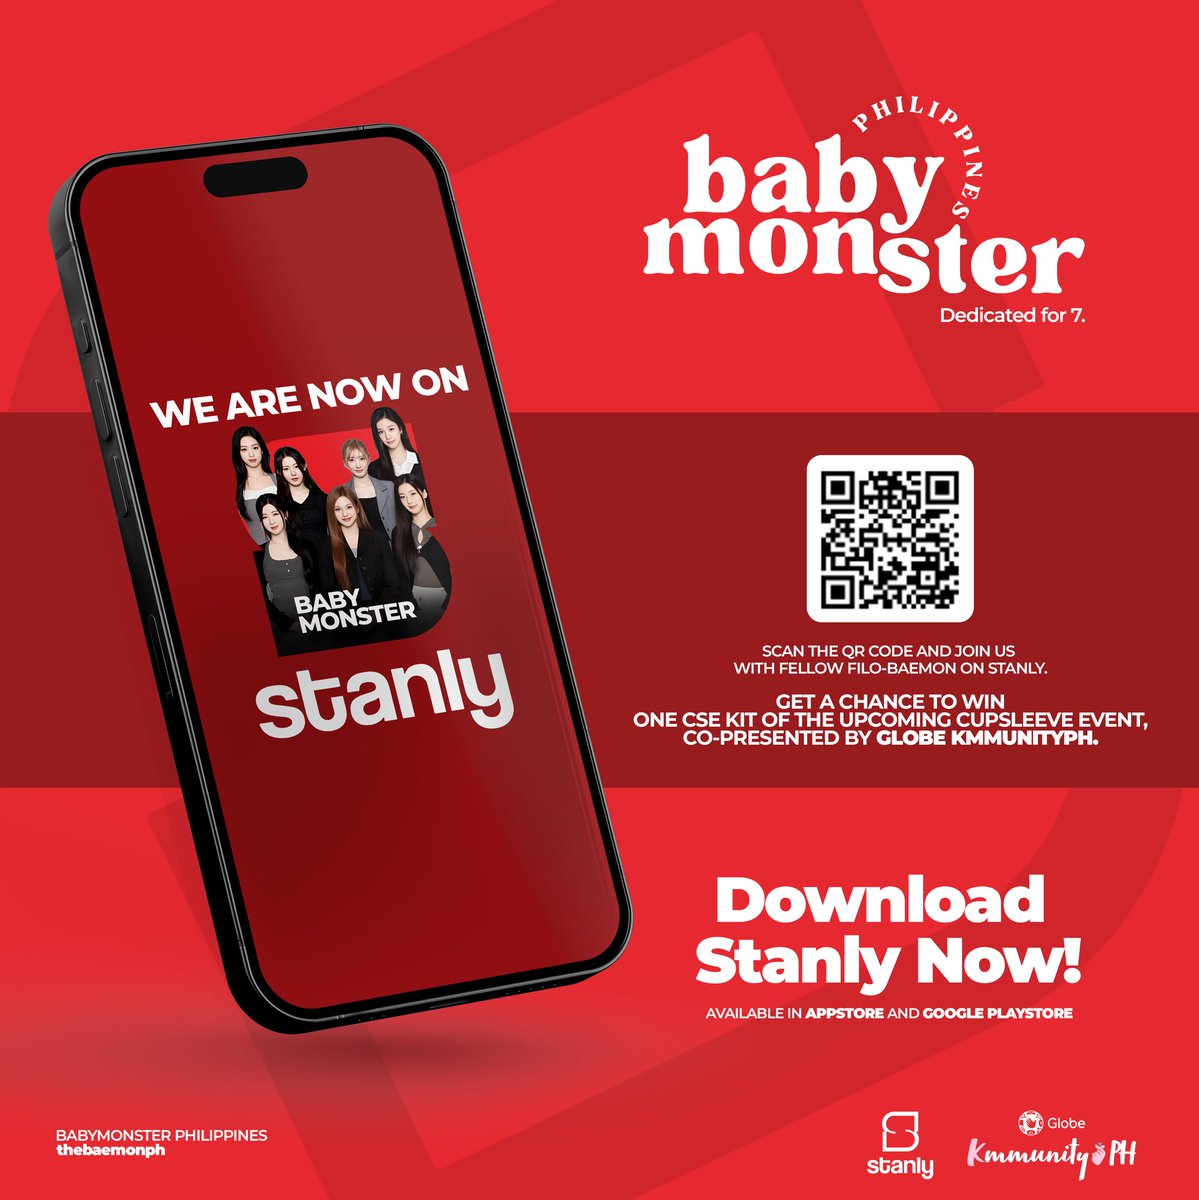 ‼️BABYMONSTER IS NOW ON STANLY‼️ We will have an announcement tonight on the BABYMONSTER Café group chat in stanly later at 12:00 A.M. Philippine Standard time!! So download stanly now and join the fandom!! Main group chat link: stanly.link//group/ll4Oxd Filo BabyMonster Fans…